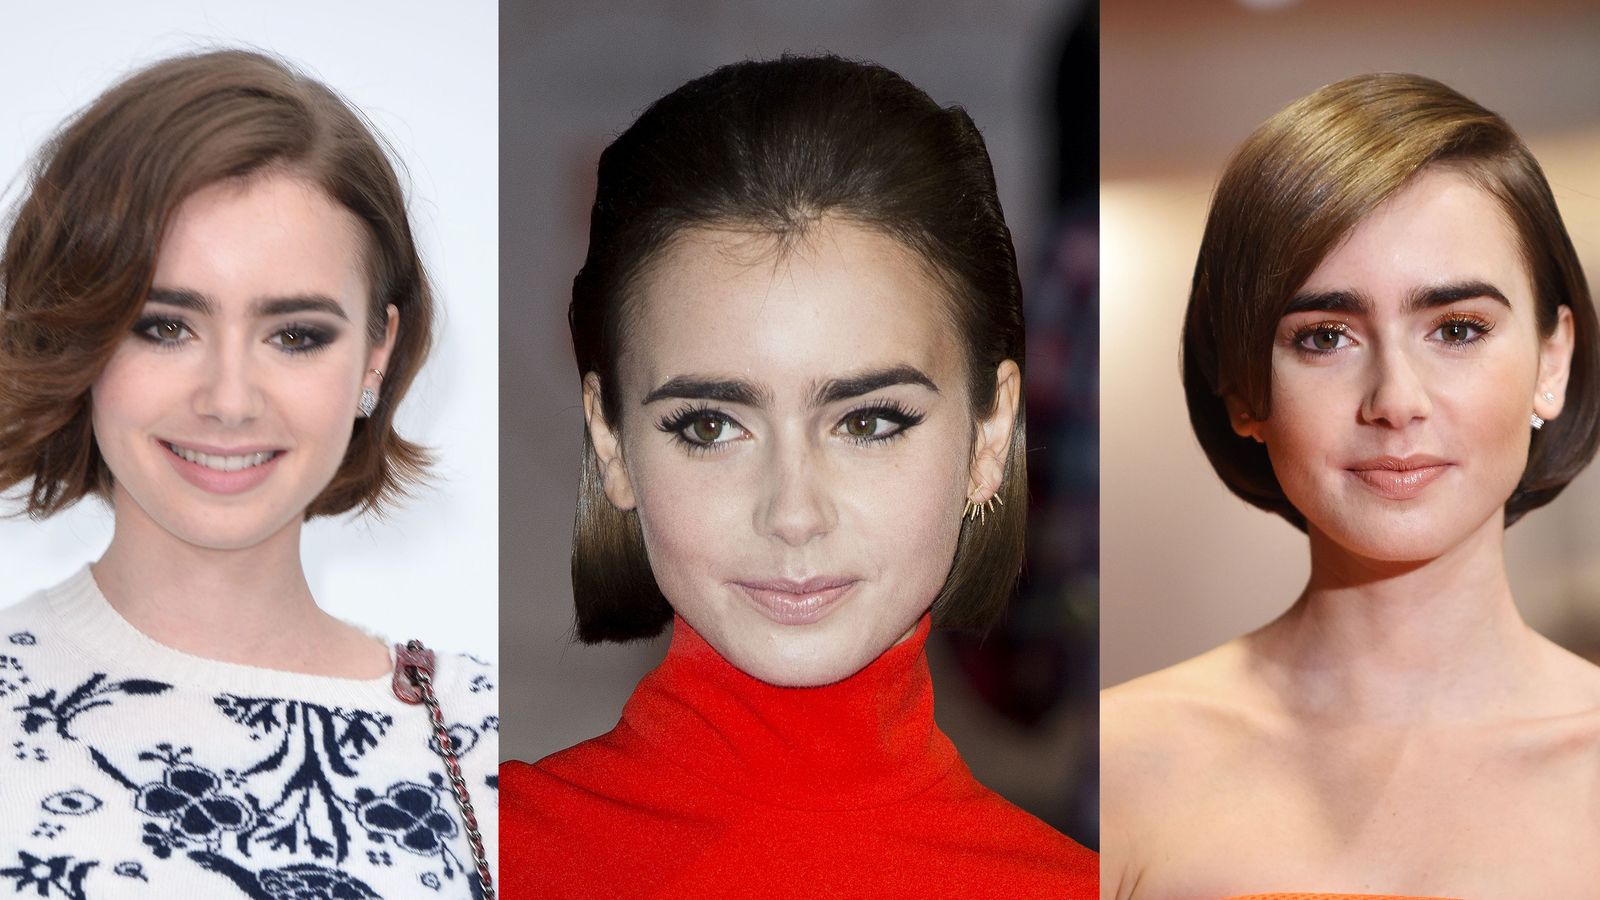 Behold: Lily Collins' 3-Step Action Plan for Getting the Coolest Cut ...